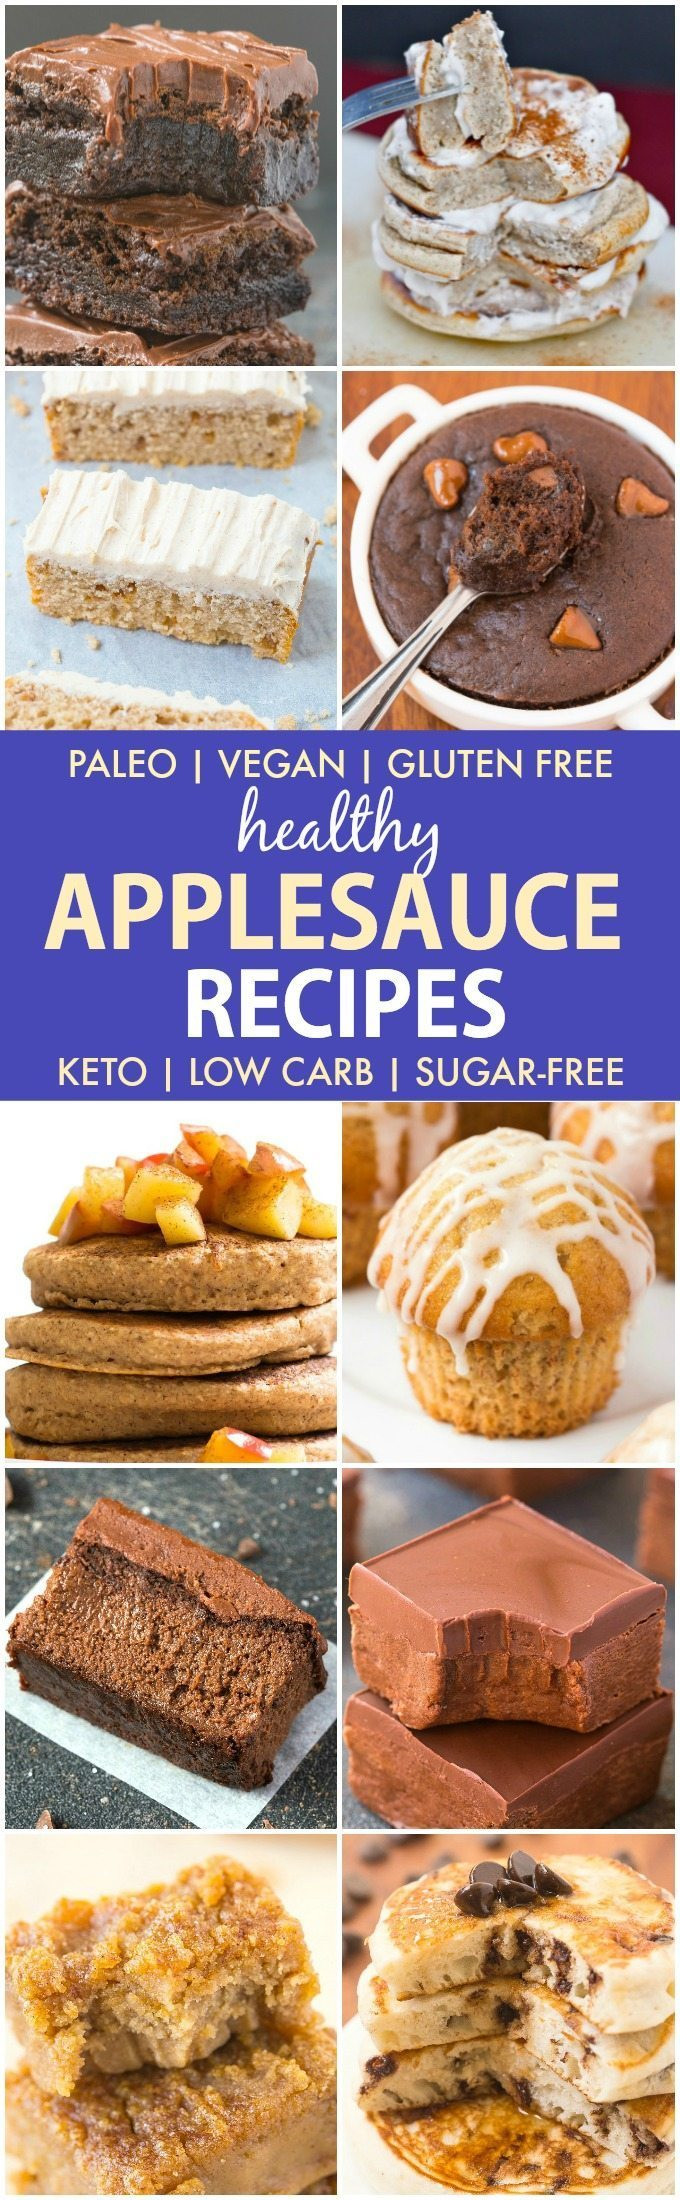 Healthy Recipes Using Applesauce
 20 Healthy Recipes Using Applesauce Paleo Vegan Gluten